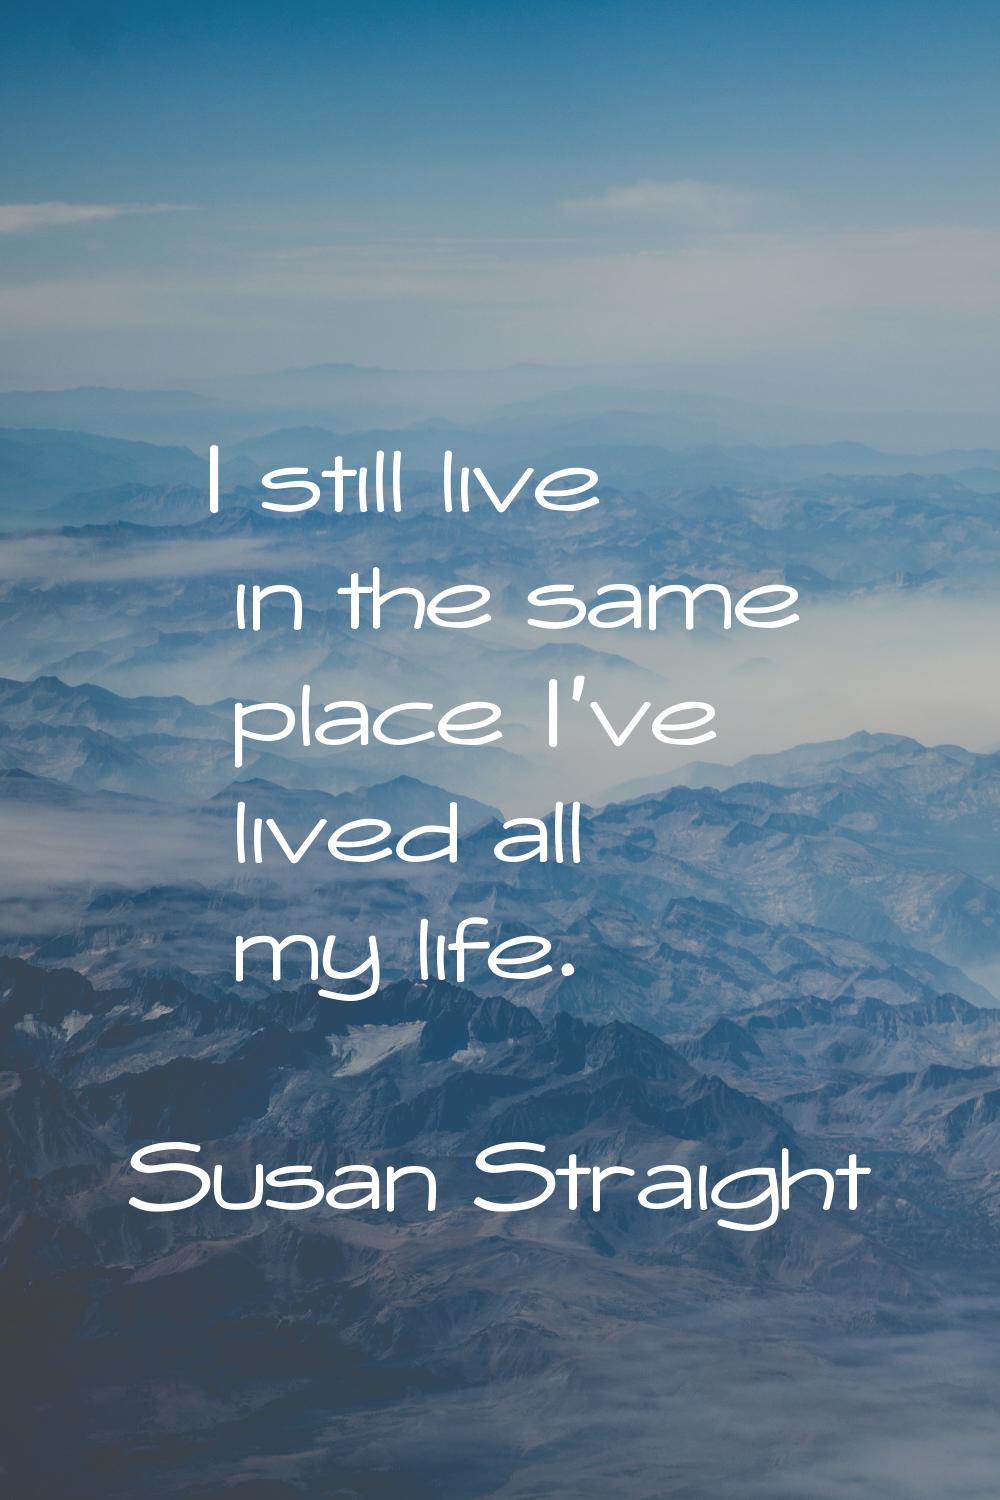 I still live in the same place I've lived all my life.